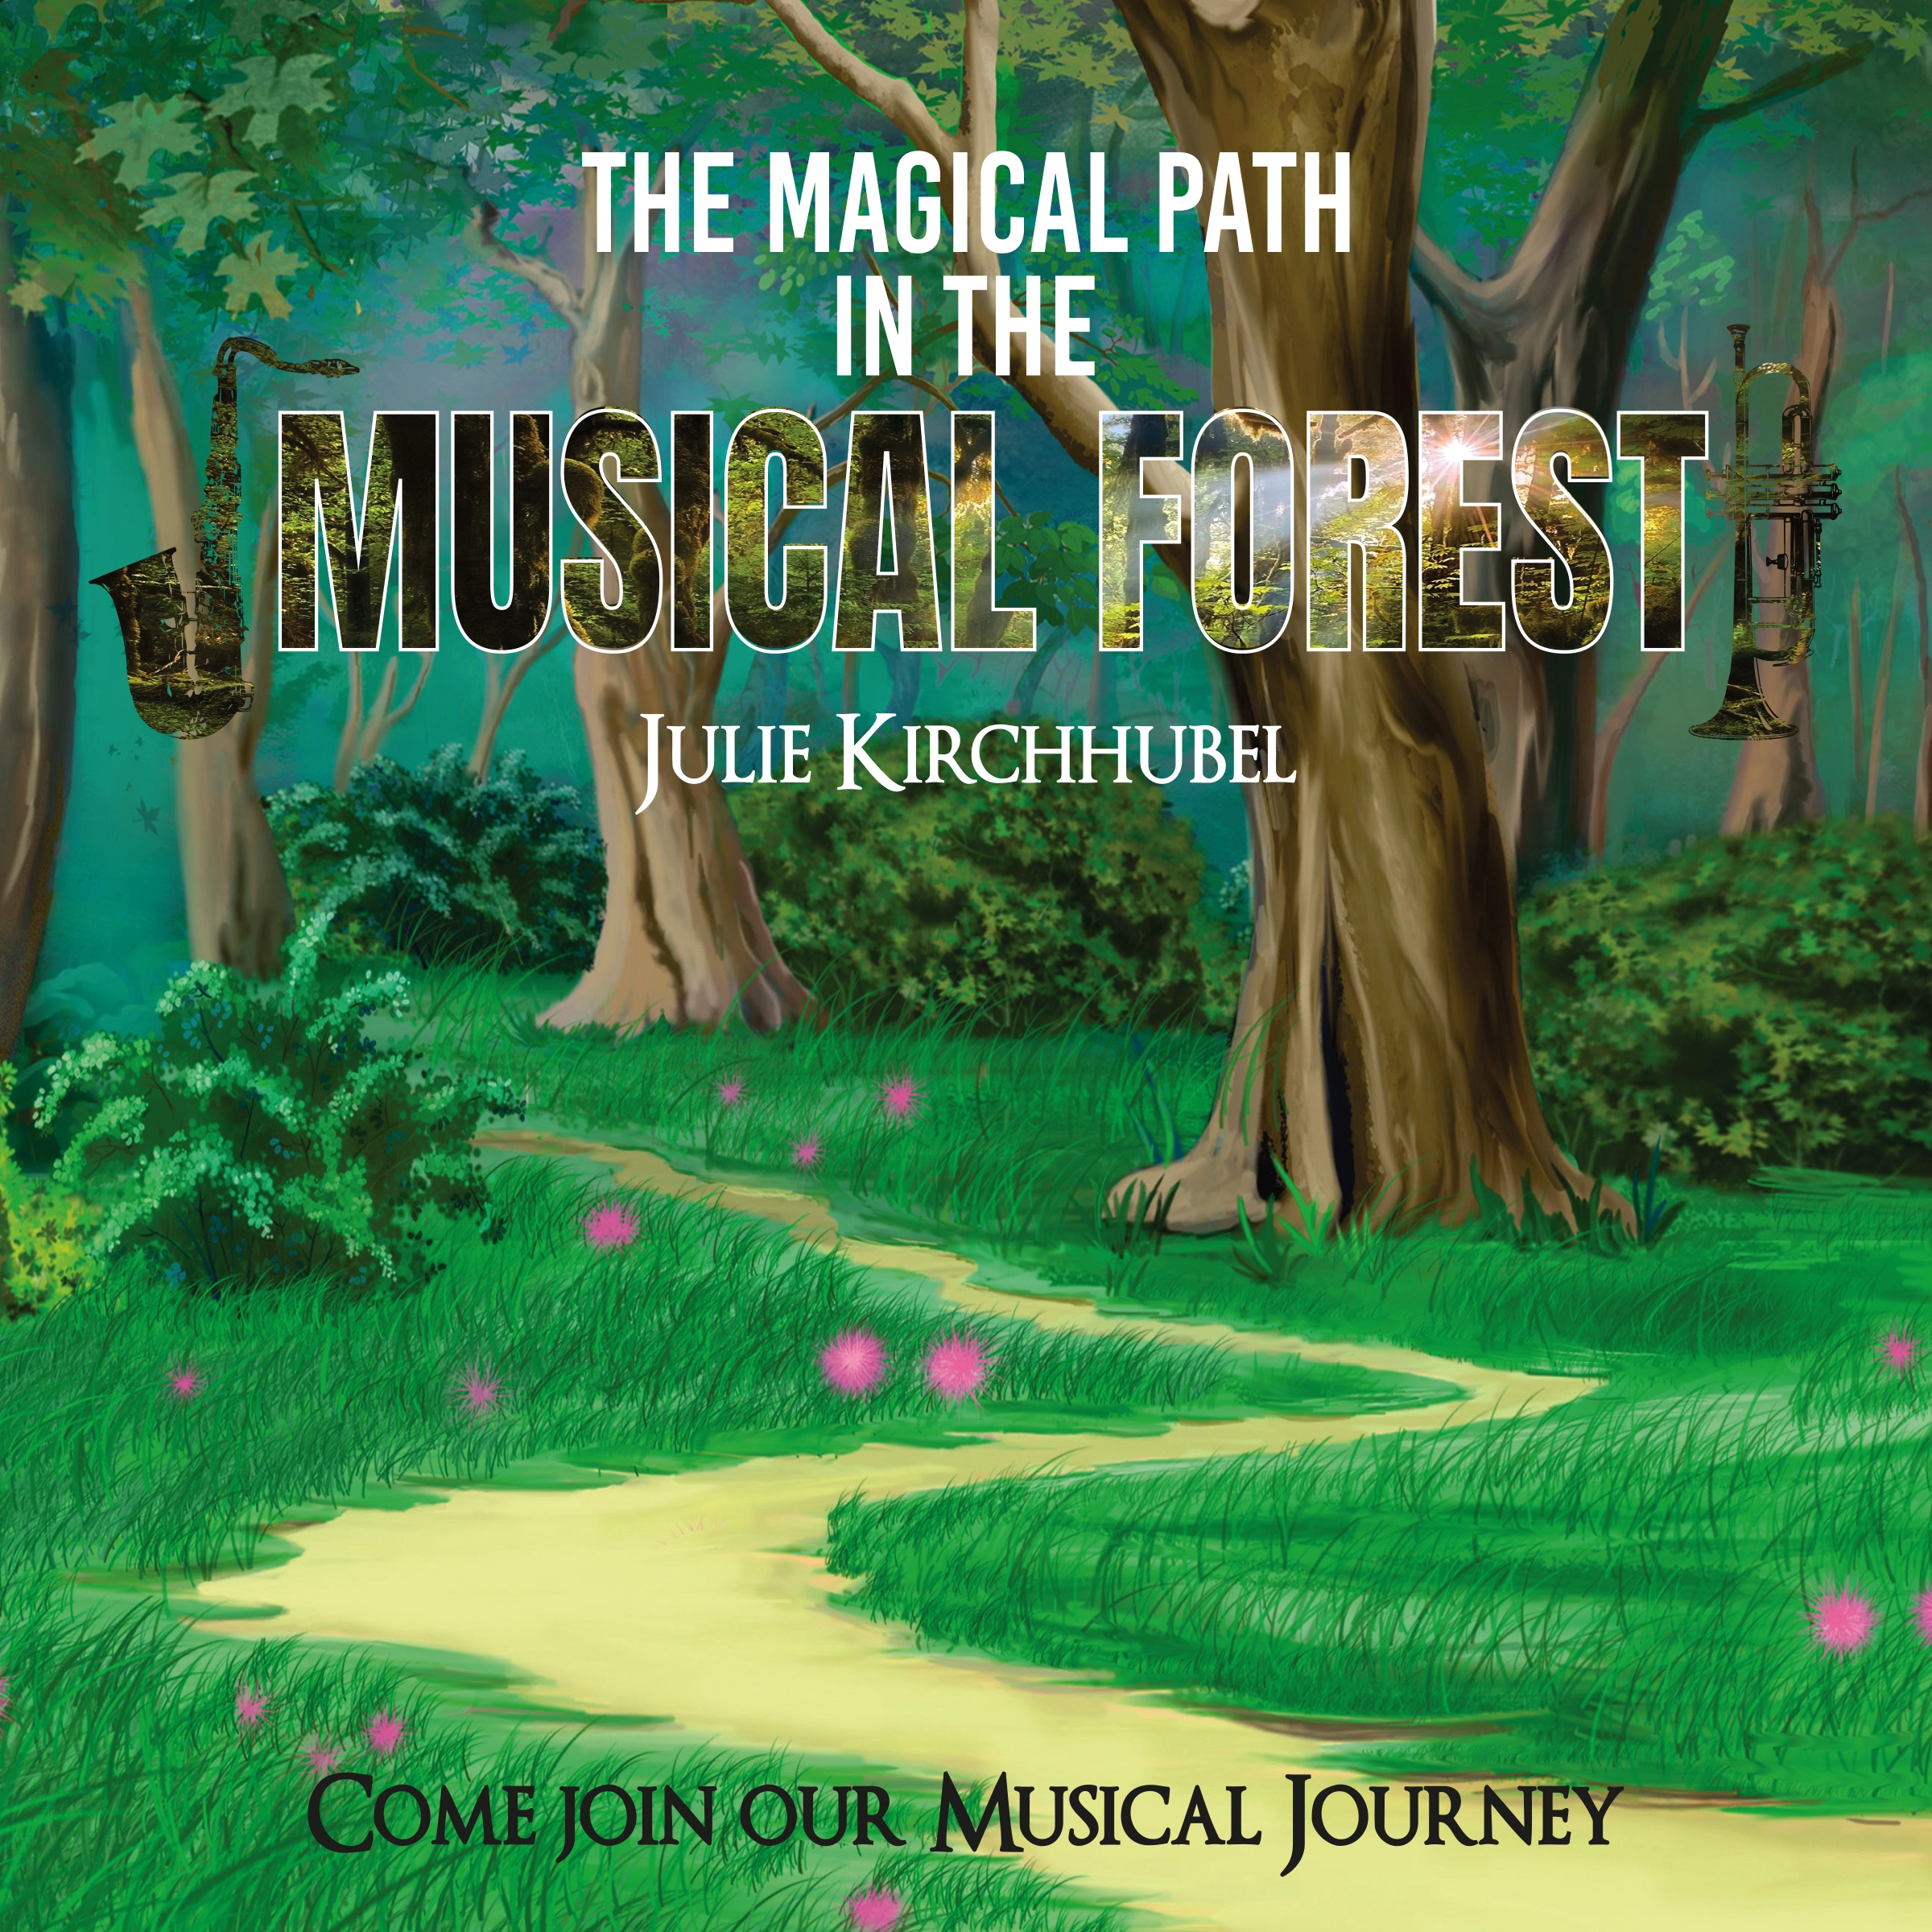 The Magical Path In The Musical Forest Audiobook by Julie Kirchhubel